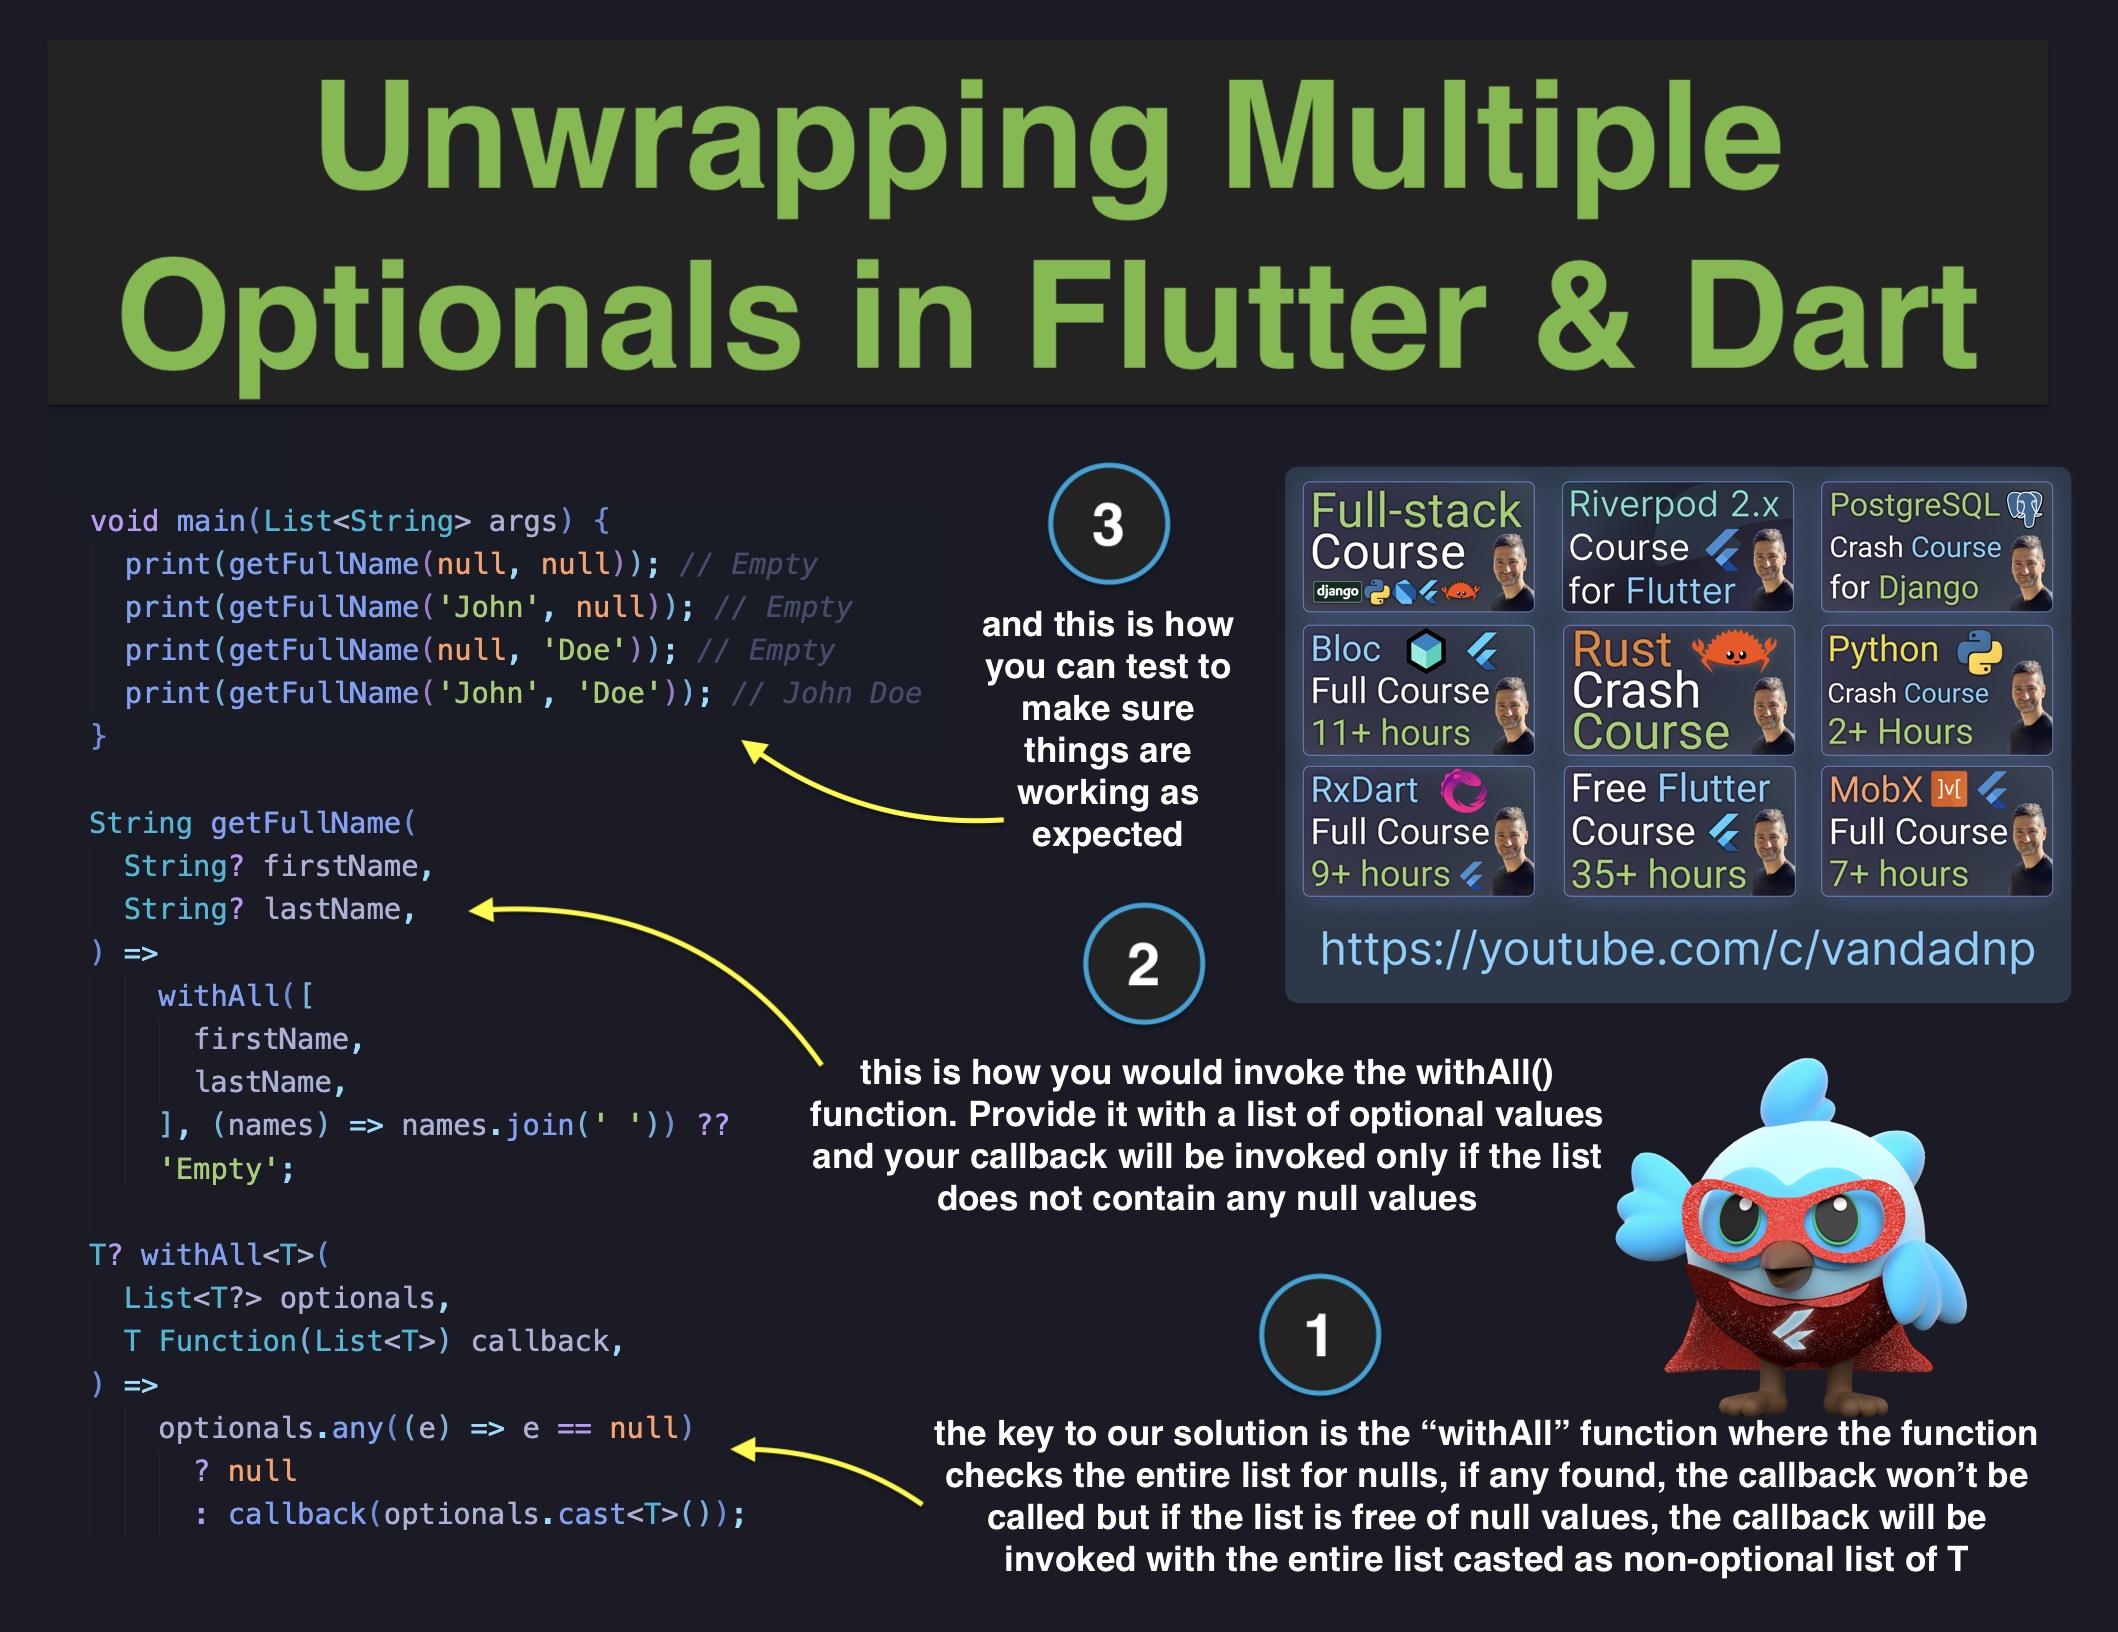 unwrapping-multiple-optionals-in-flutter-and-dart.jpg